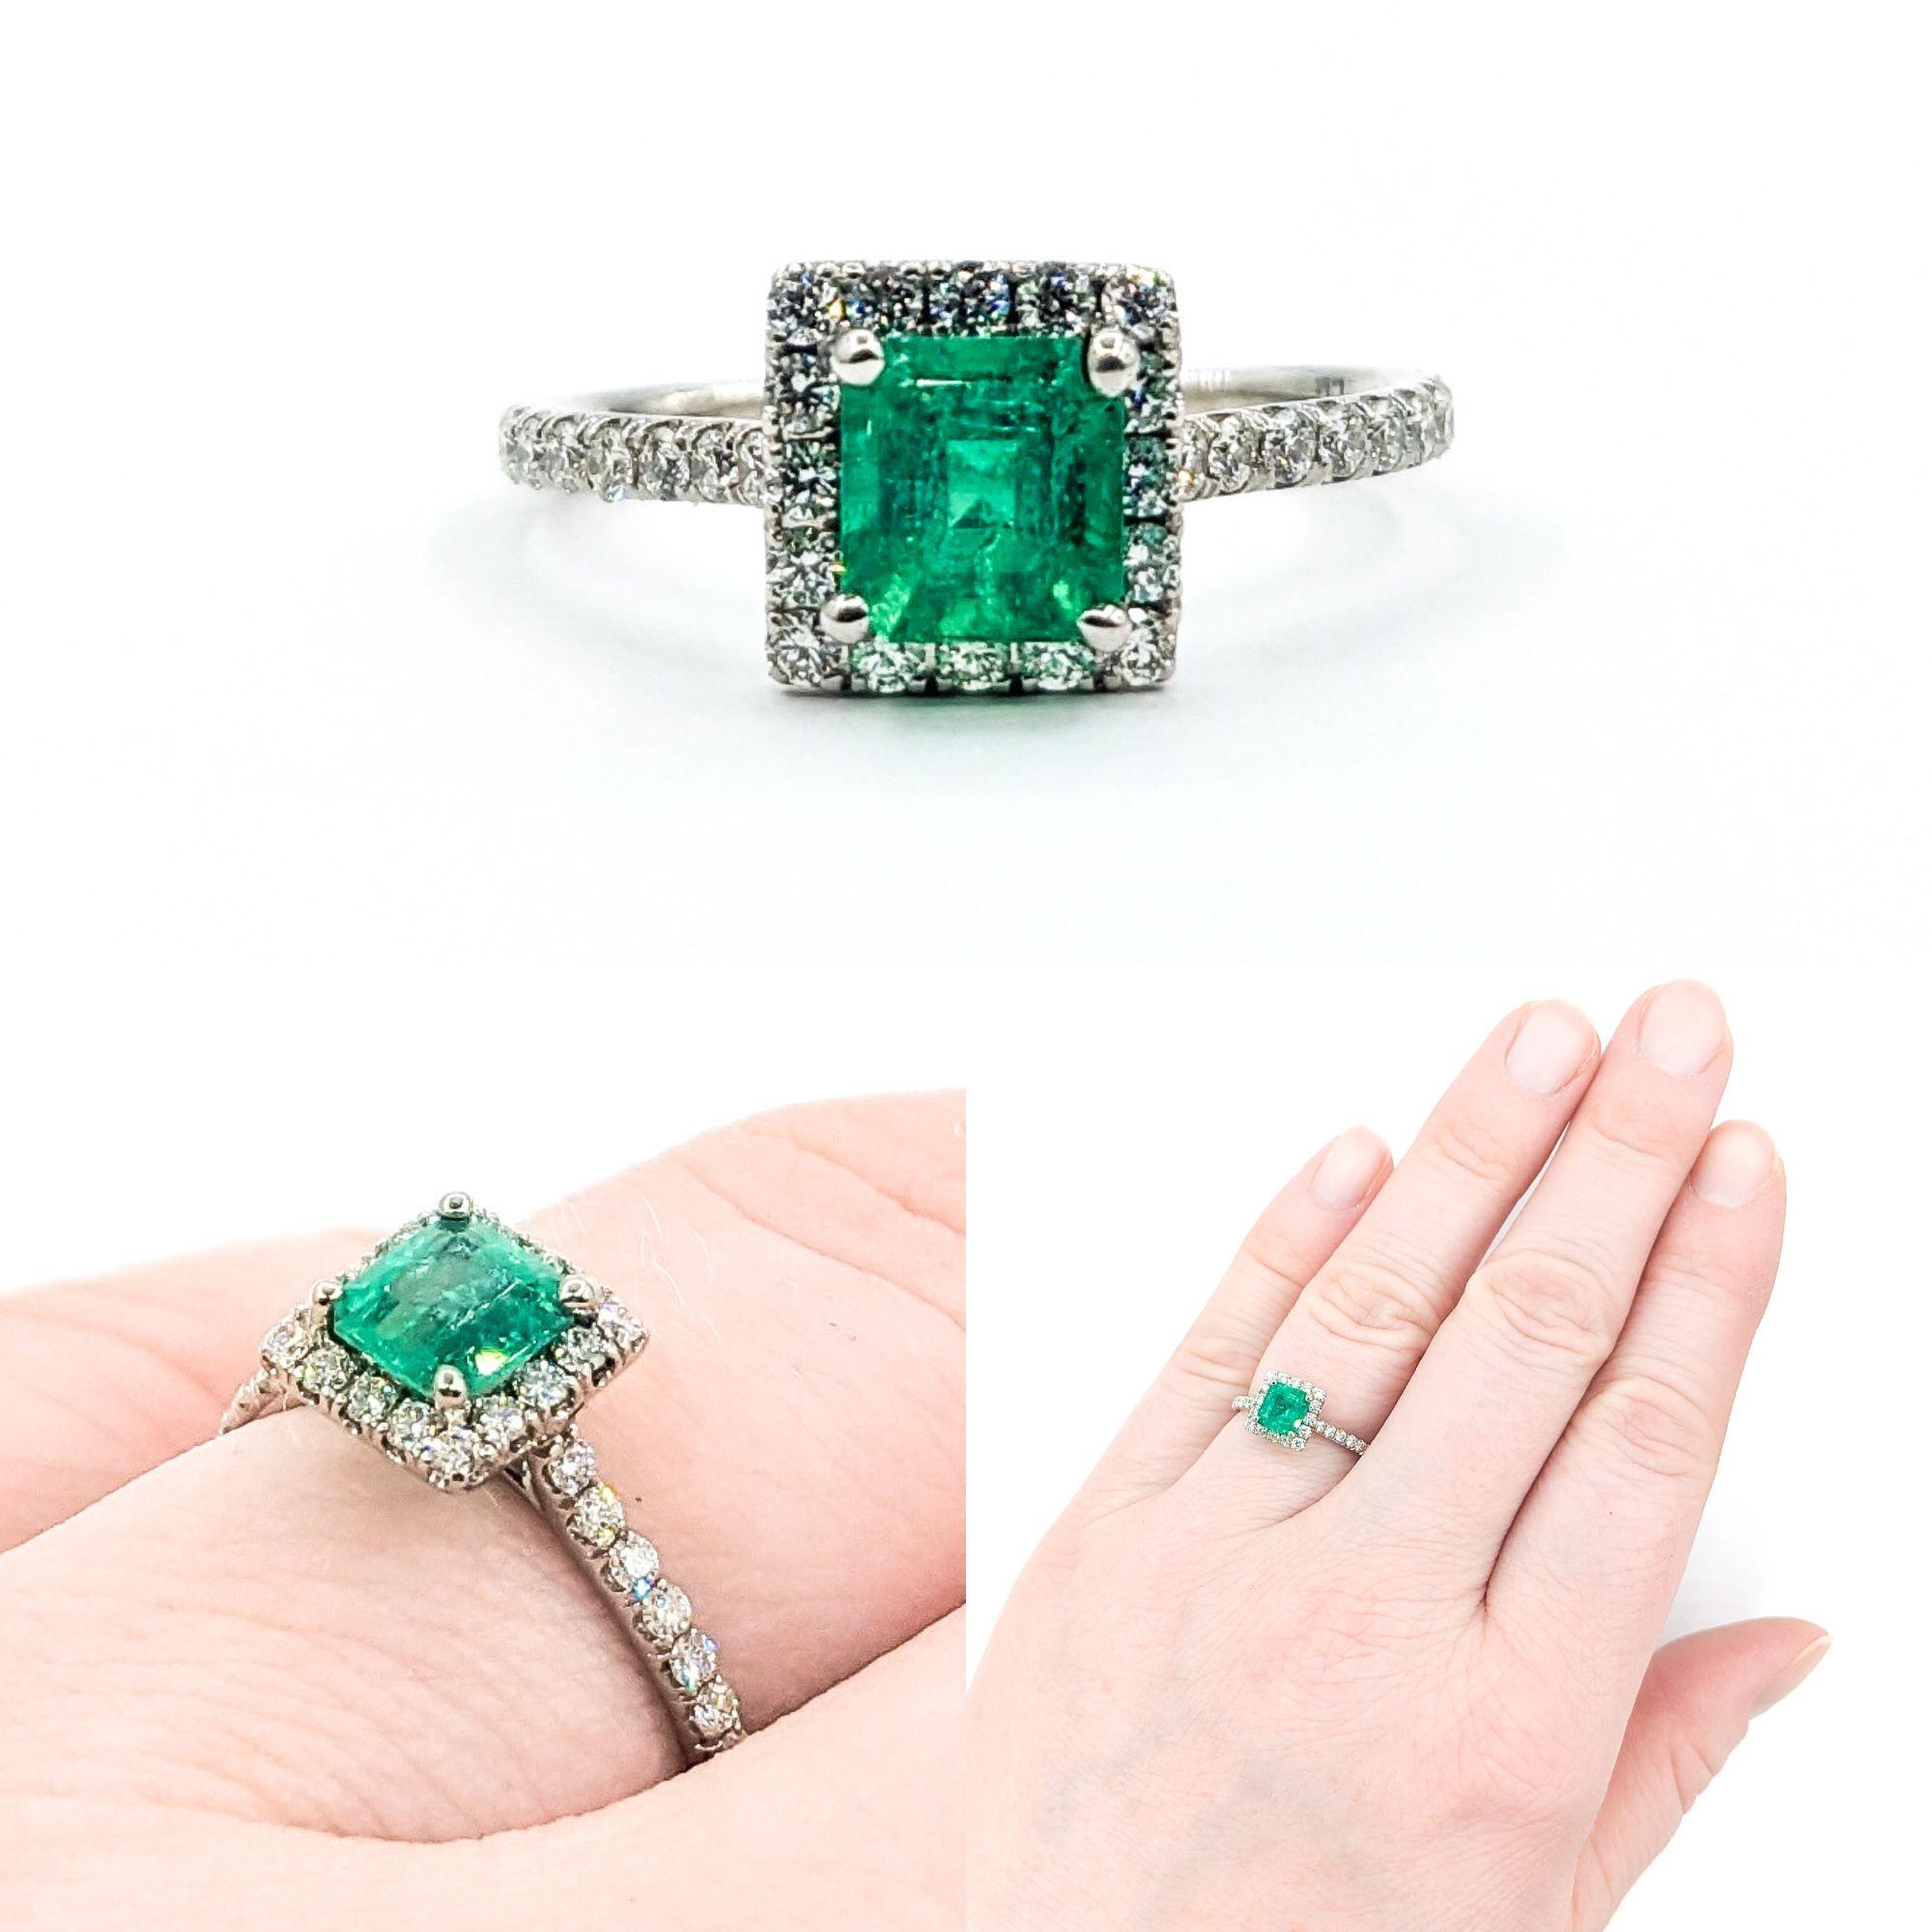 .67ct Colombian GIA Emerald & Diamond Halo Ring In White Gold

Presenting a stunning Emerald Ring, finely crafted in 18k white gold. This exquisite piece highlights a .67ct Colombian Emerald, beautifully complemented by .40ctw diamonds. The Emerald